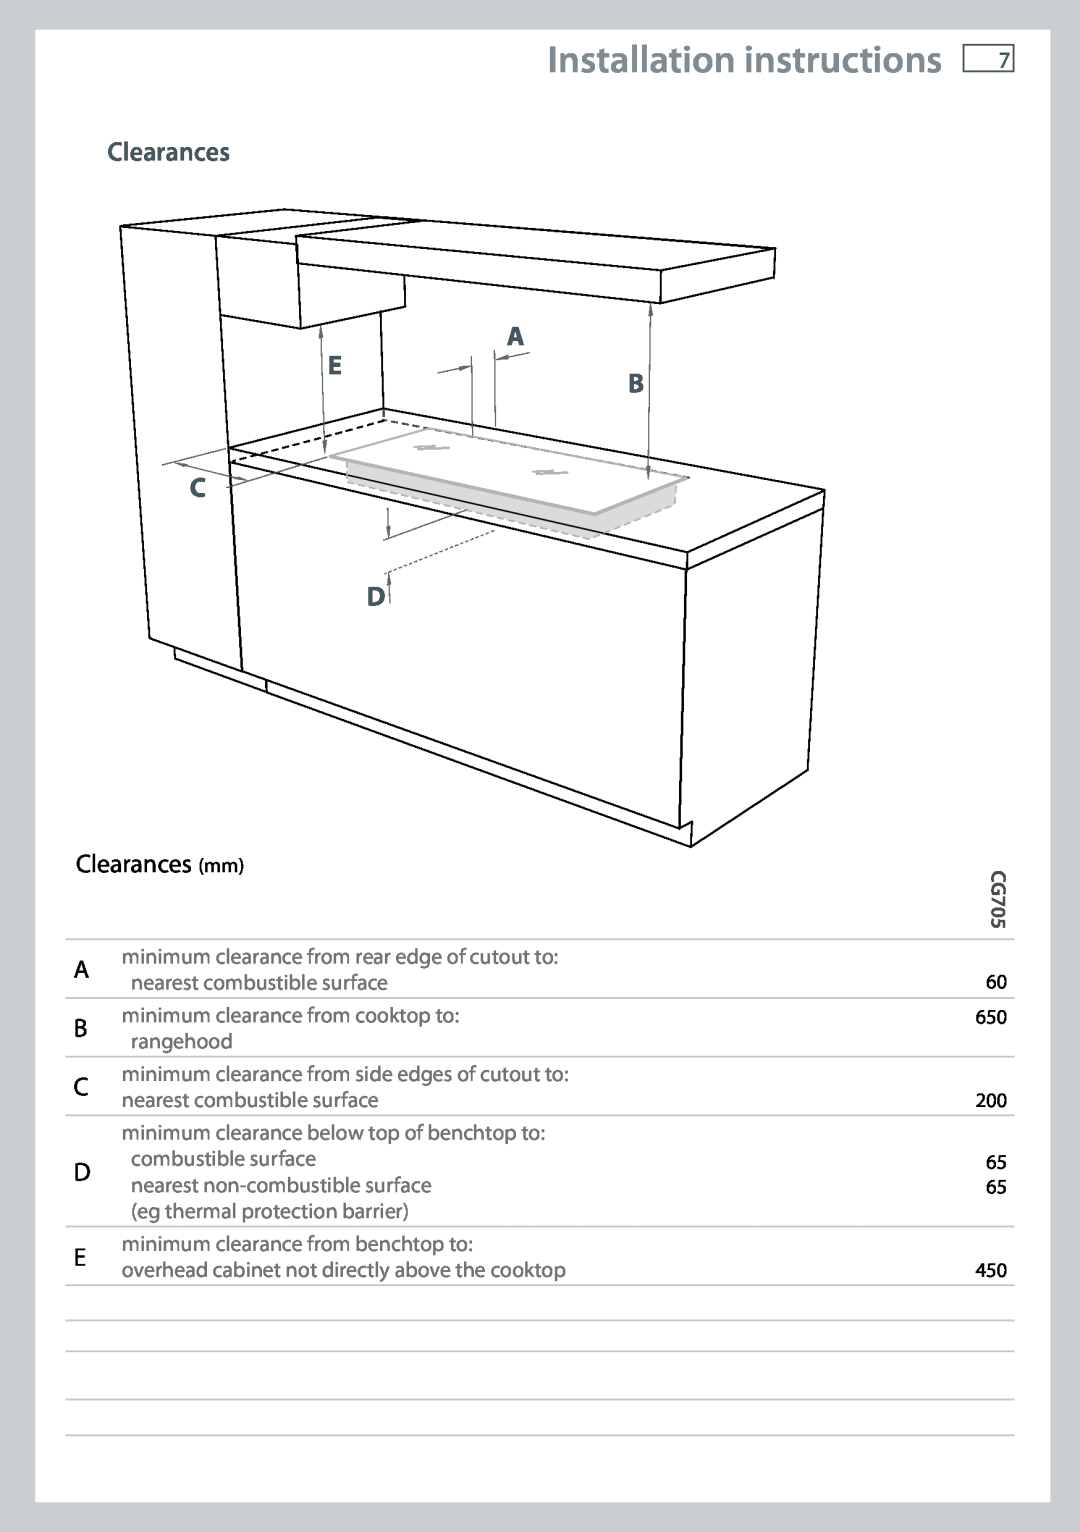 Fisher & Paykel CG705 installation instructions Clearances A, Clearances mm, Installation instructions 